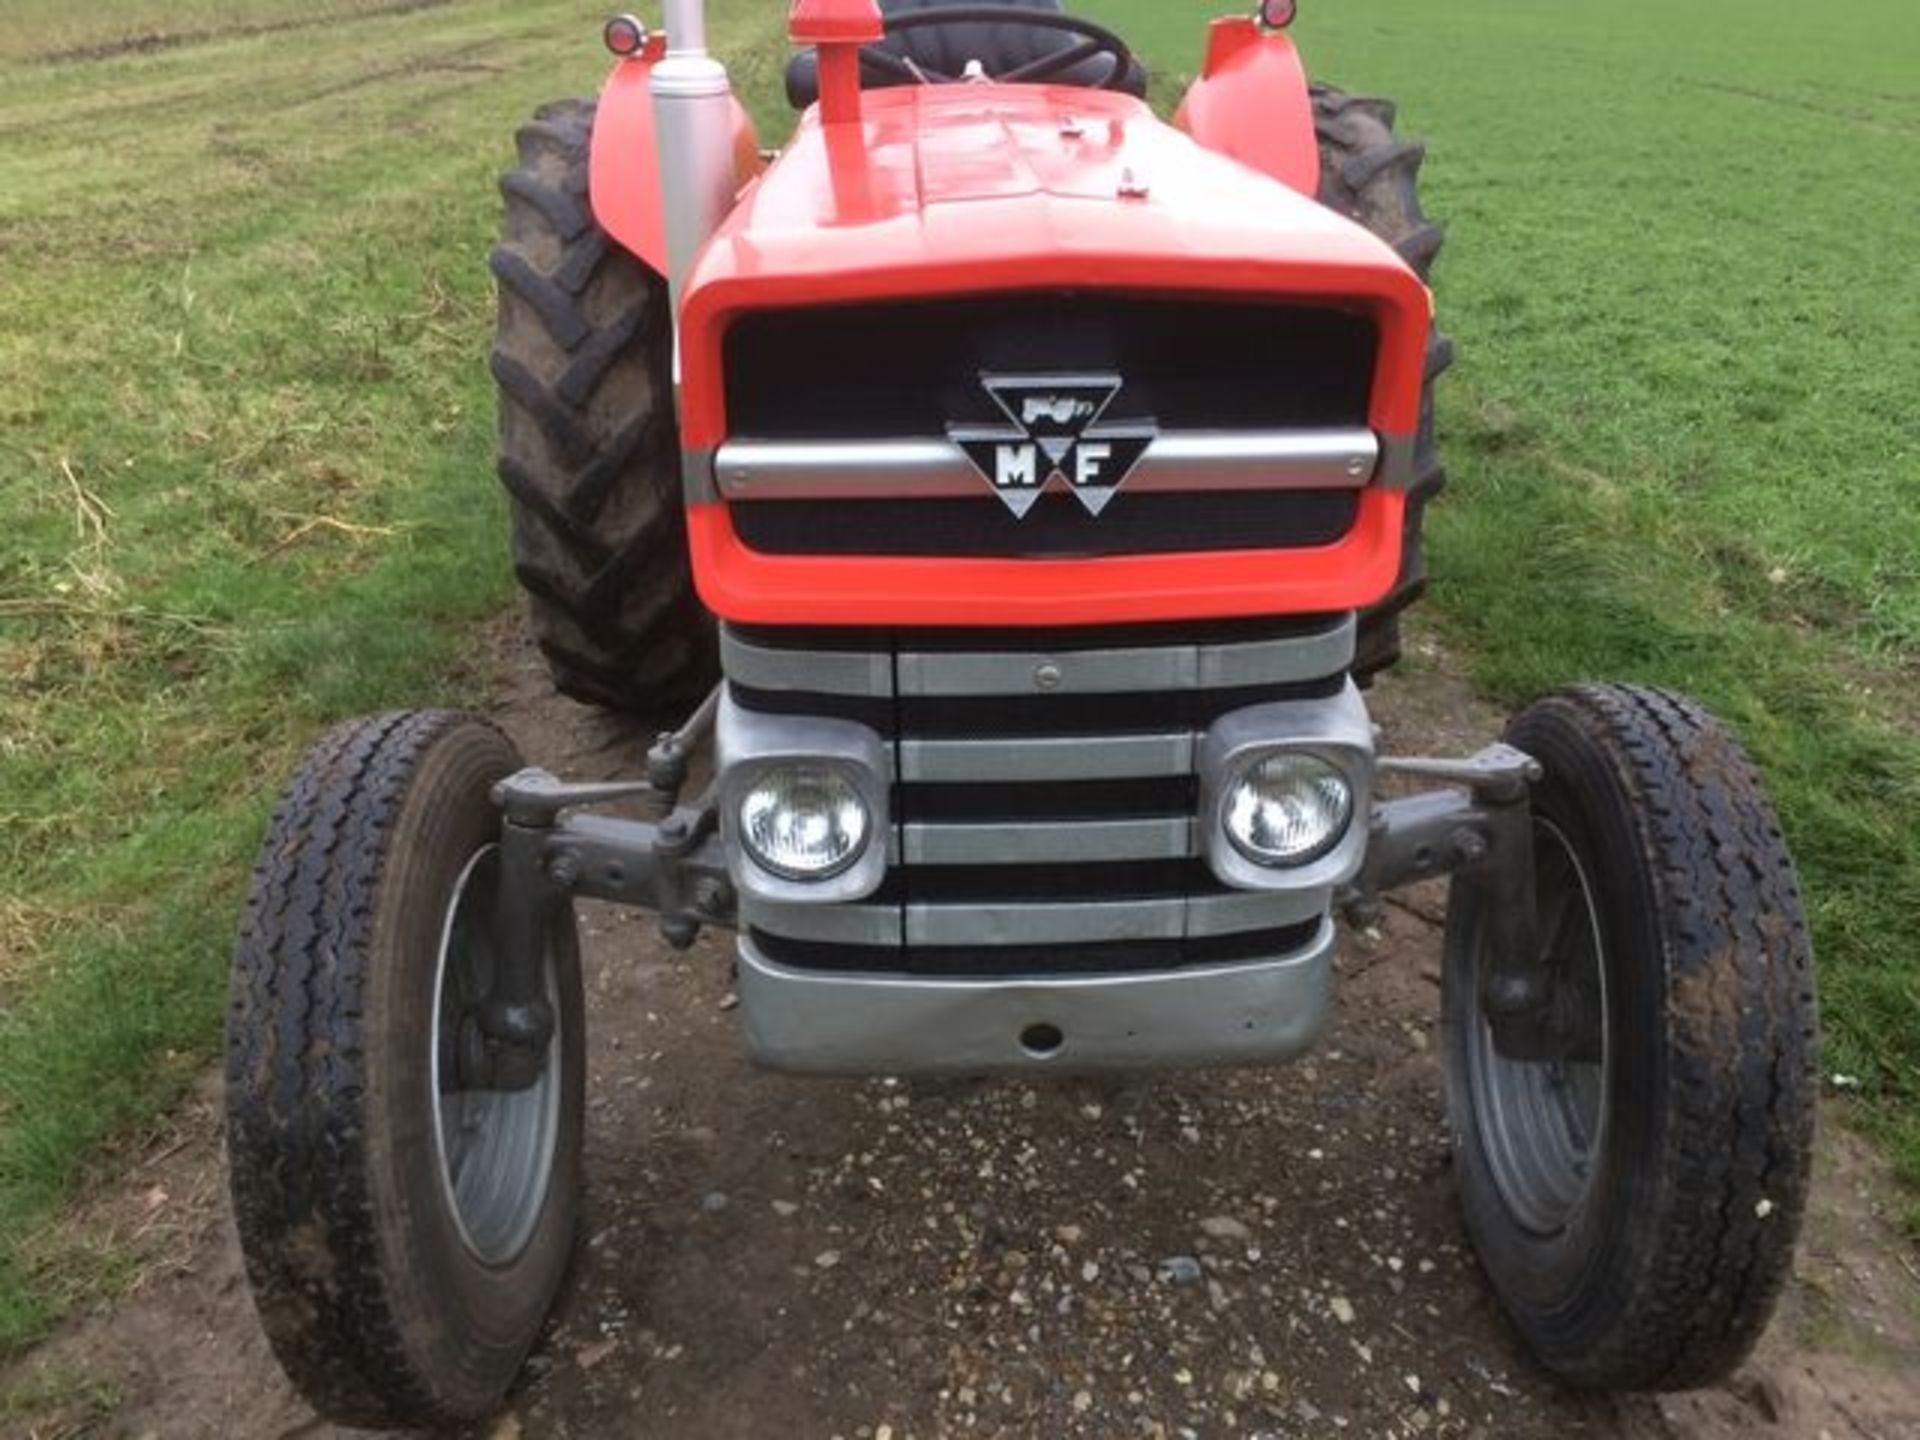 MASSEY FERGUSON Age unknown production ran between 1965 and 1975 this example shows 4107 hours - Image 6 of 10